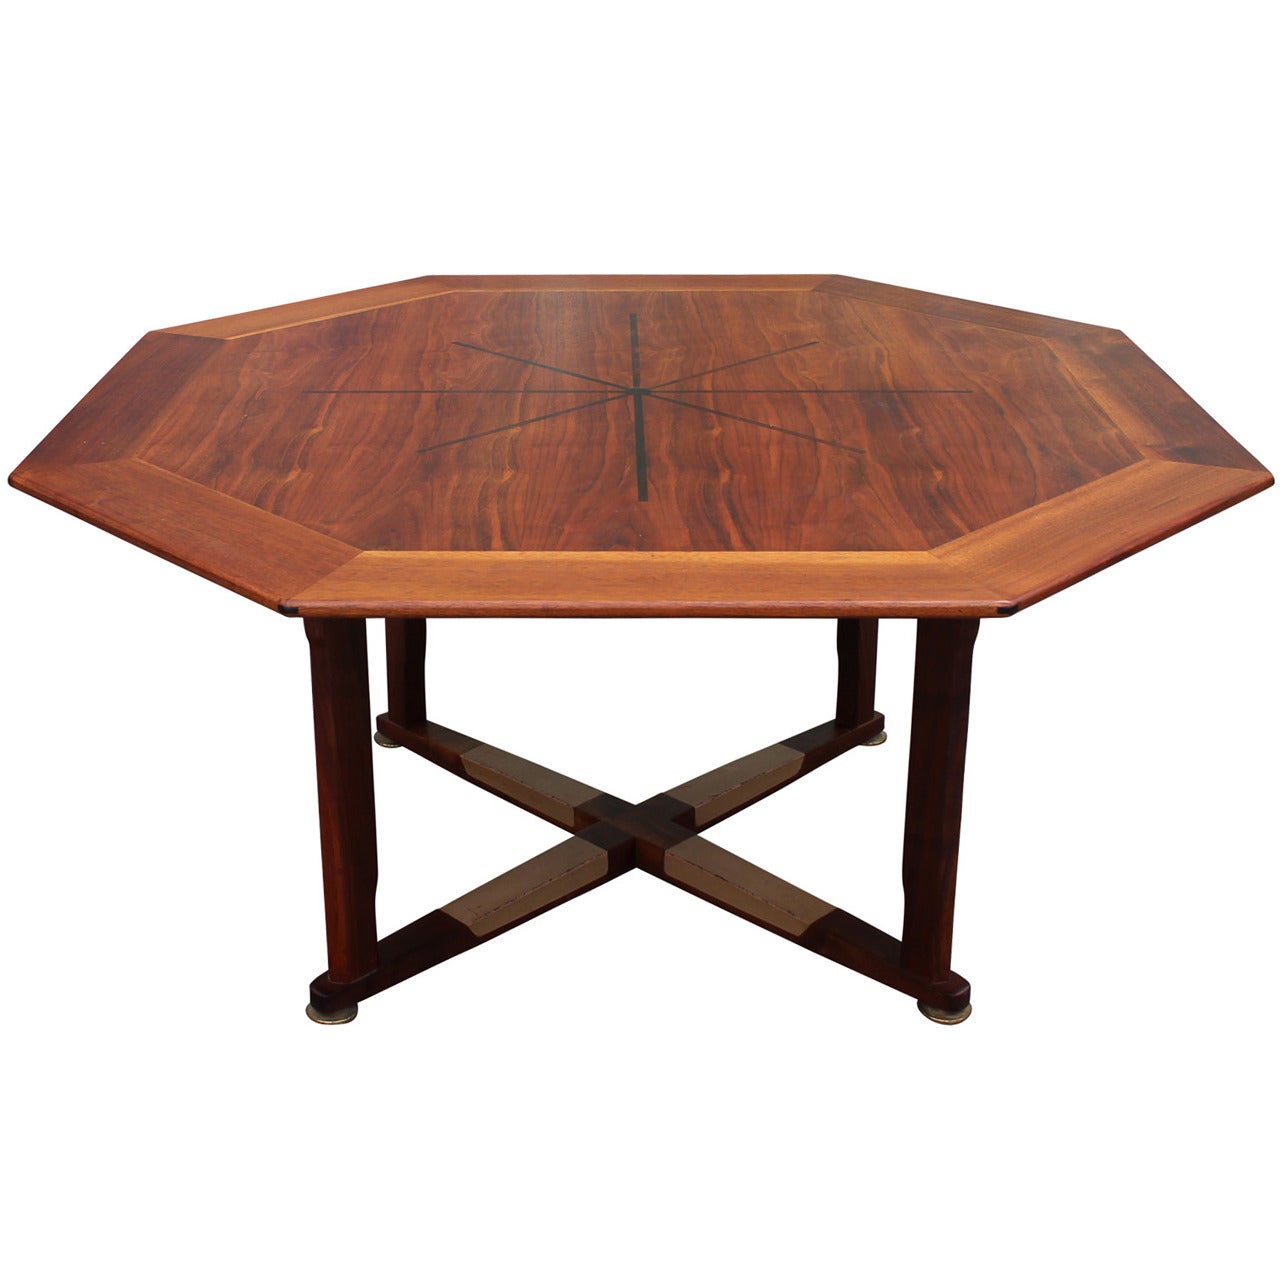 Beautiful Janus Game Table by Edward Wormley for Dunbar